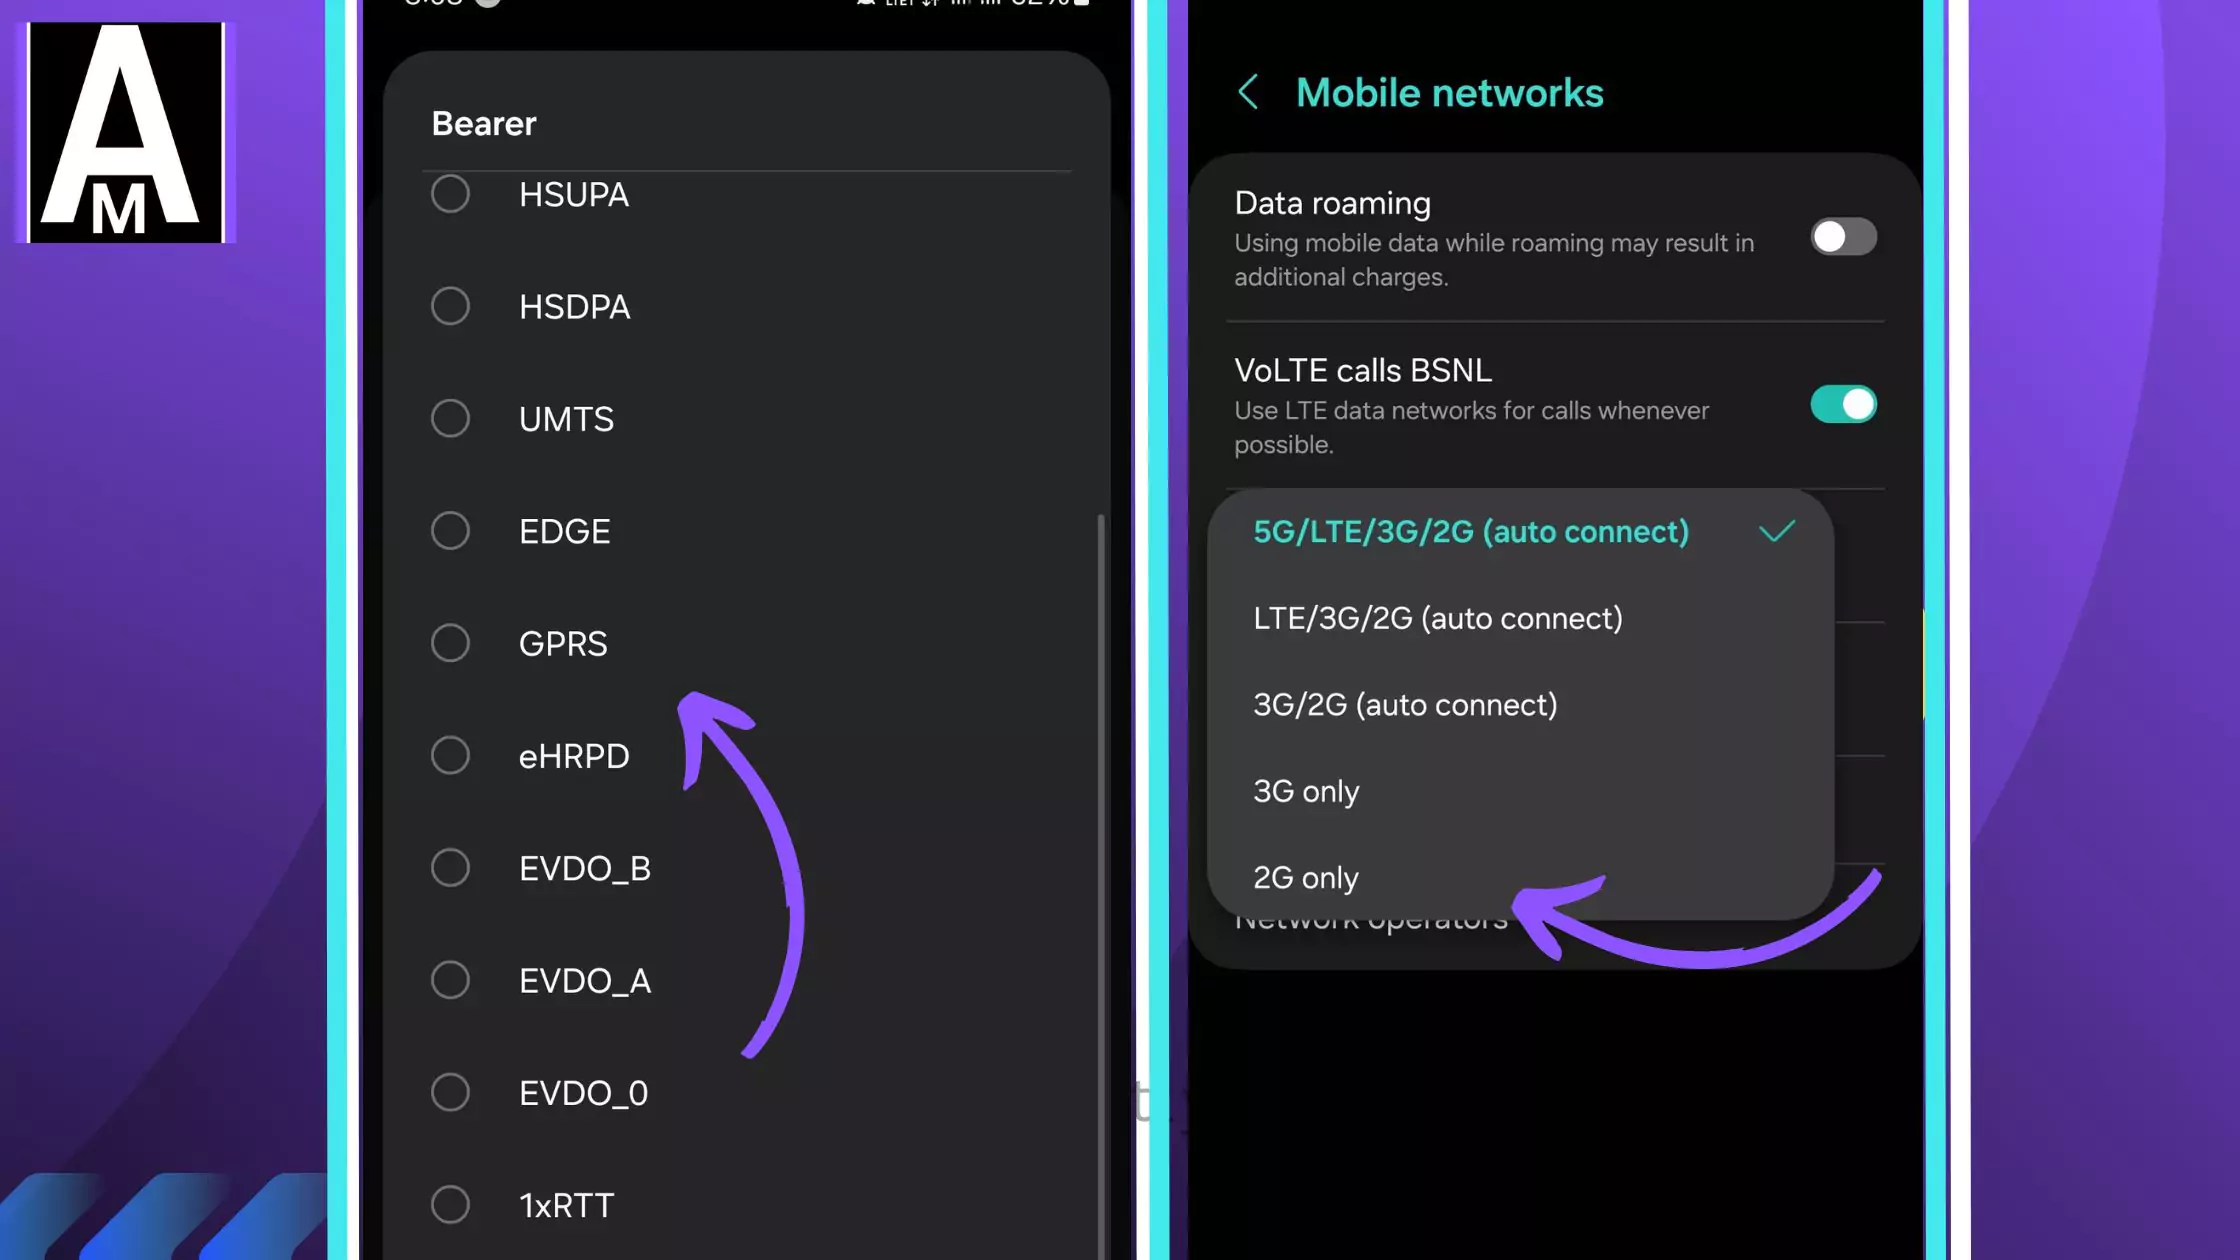 screenshots of GPRS from bearer and network selection mode